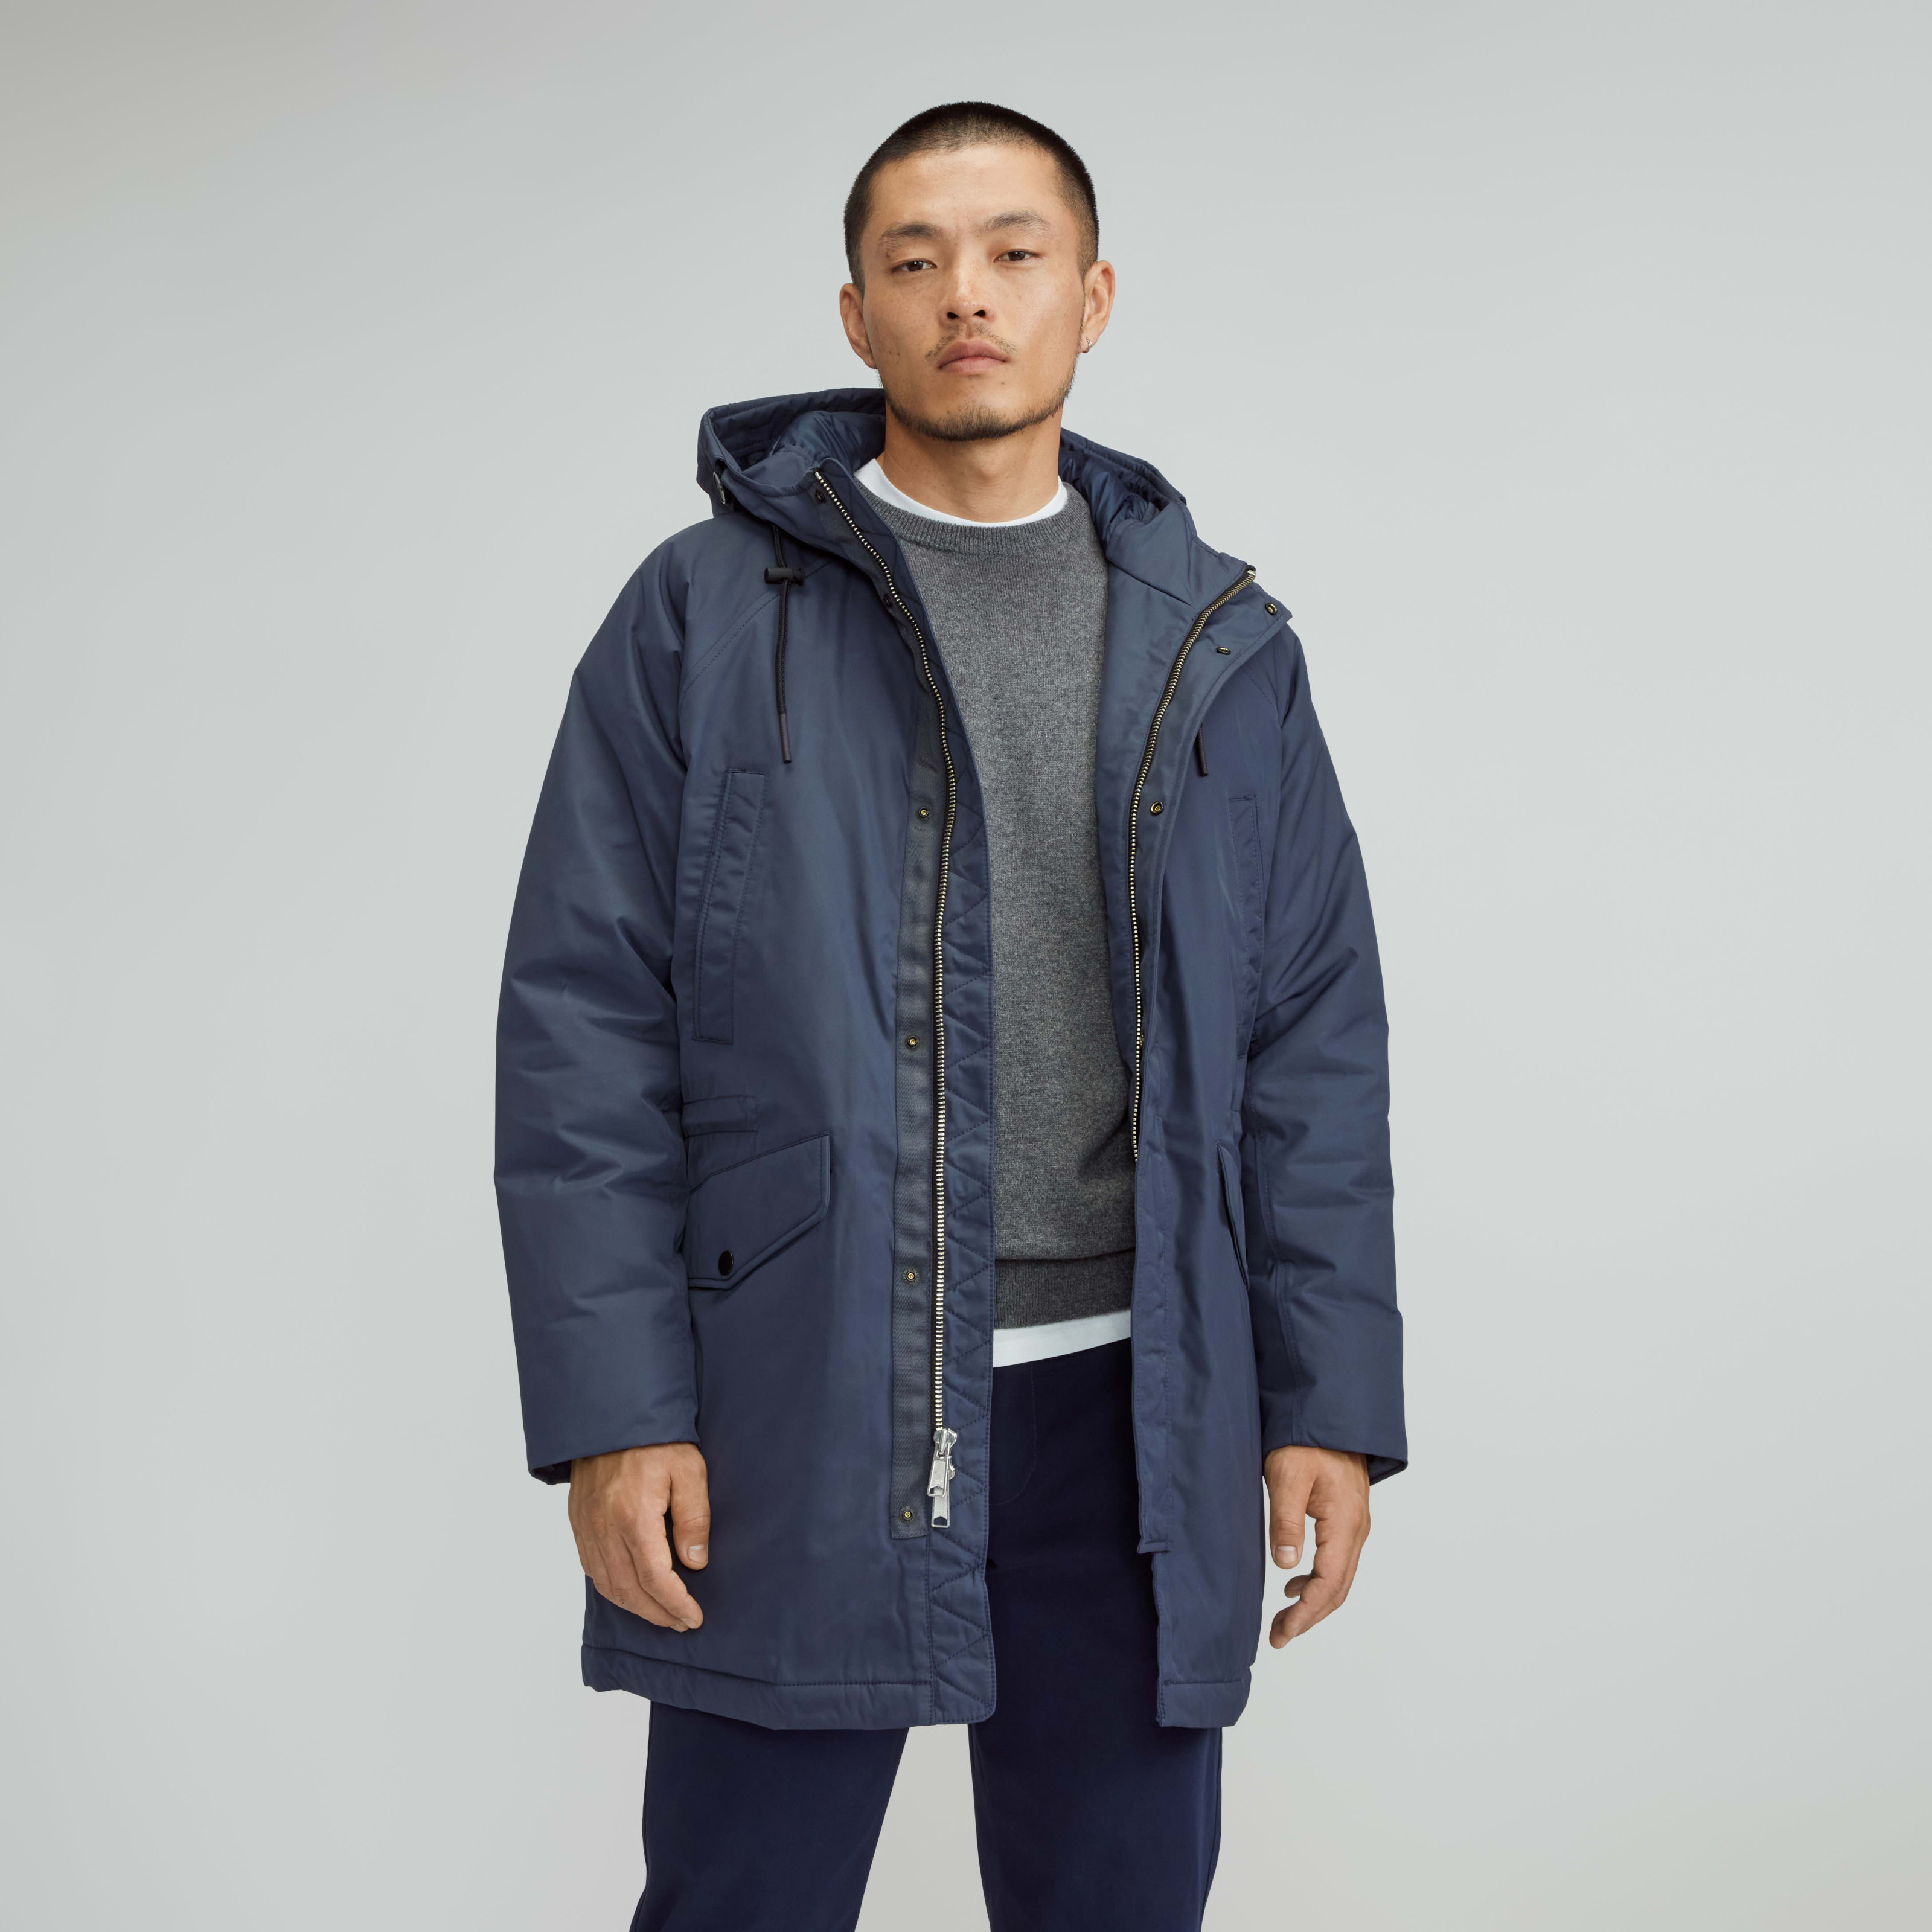 men's renew long parka by everlane in india ink, size xs